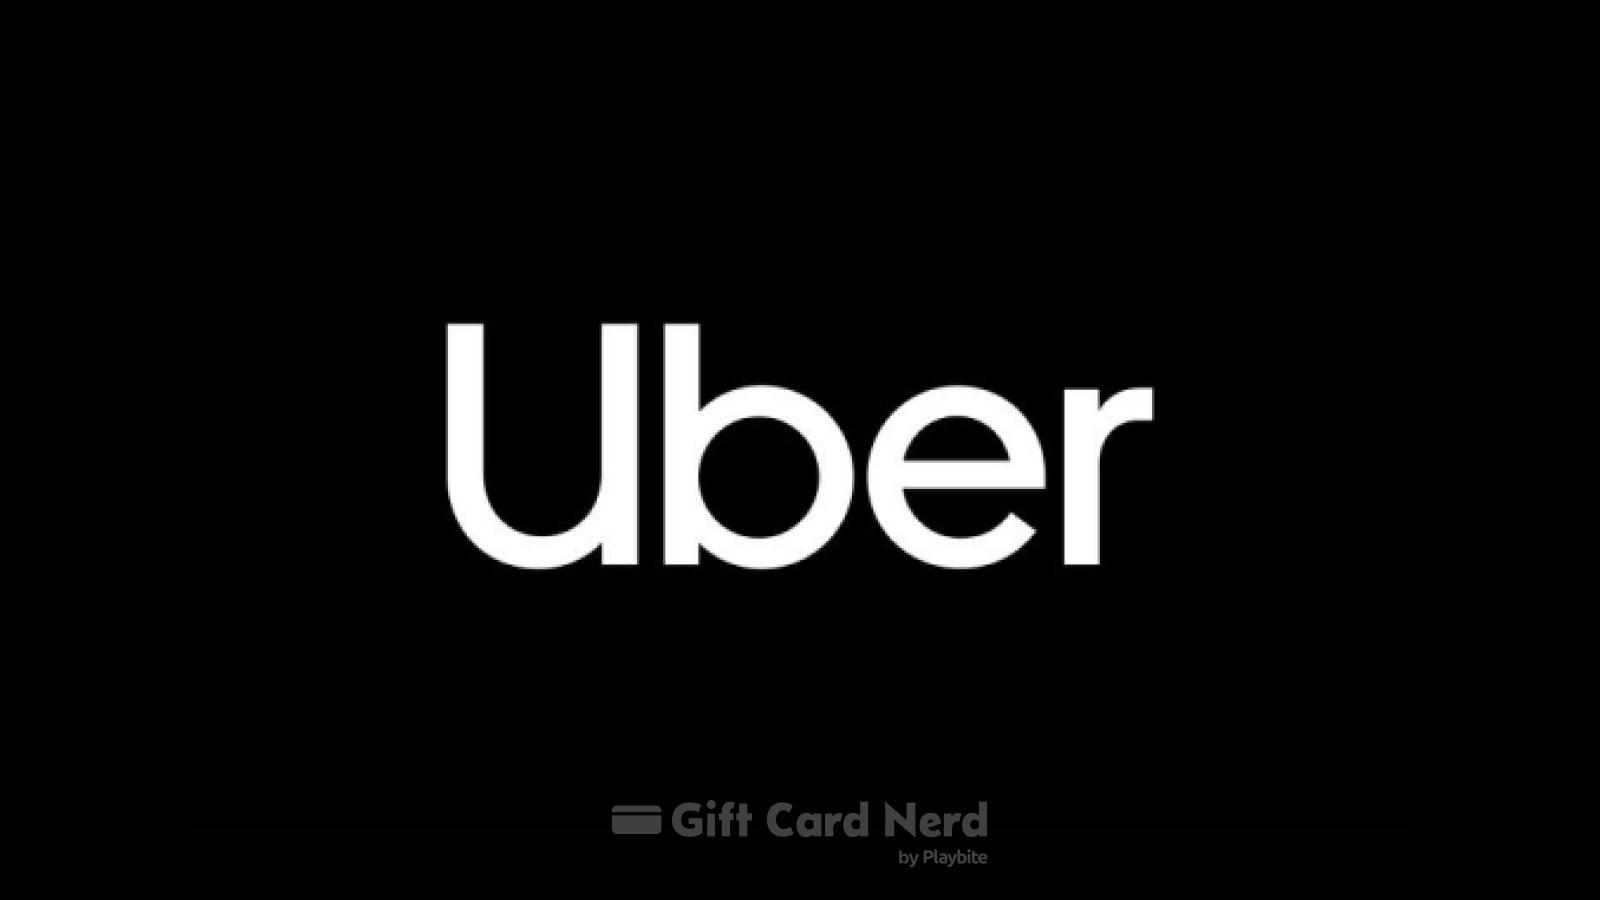 Does Game Stop Sell Uber Gift Cards?